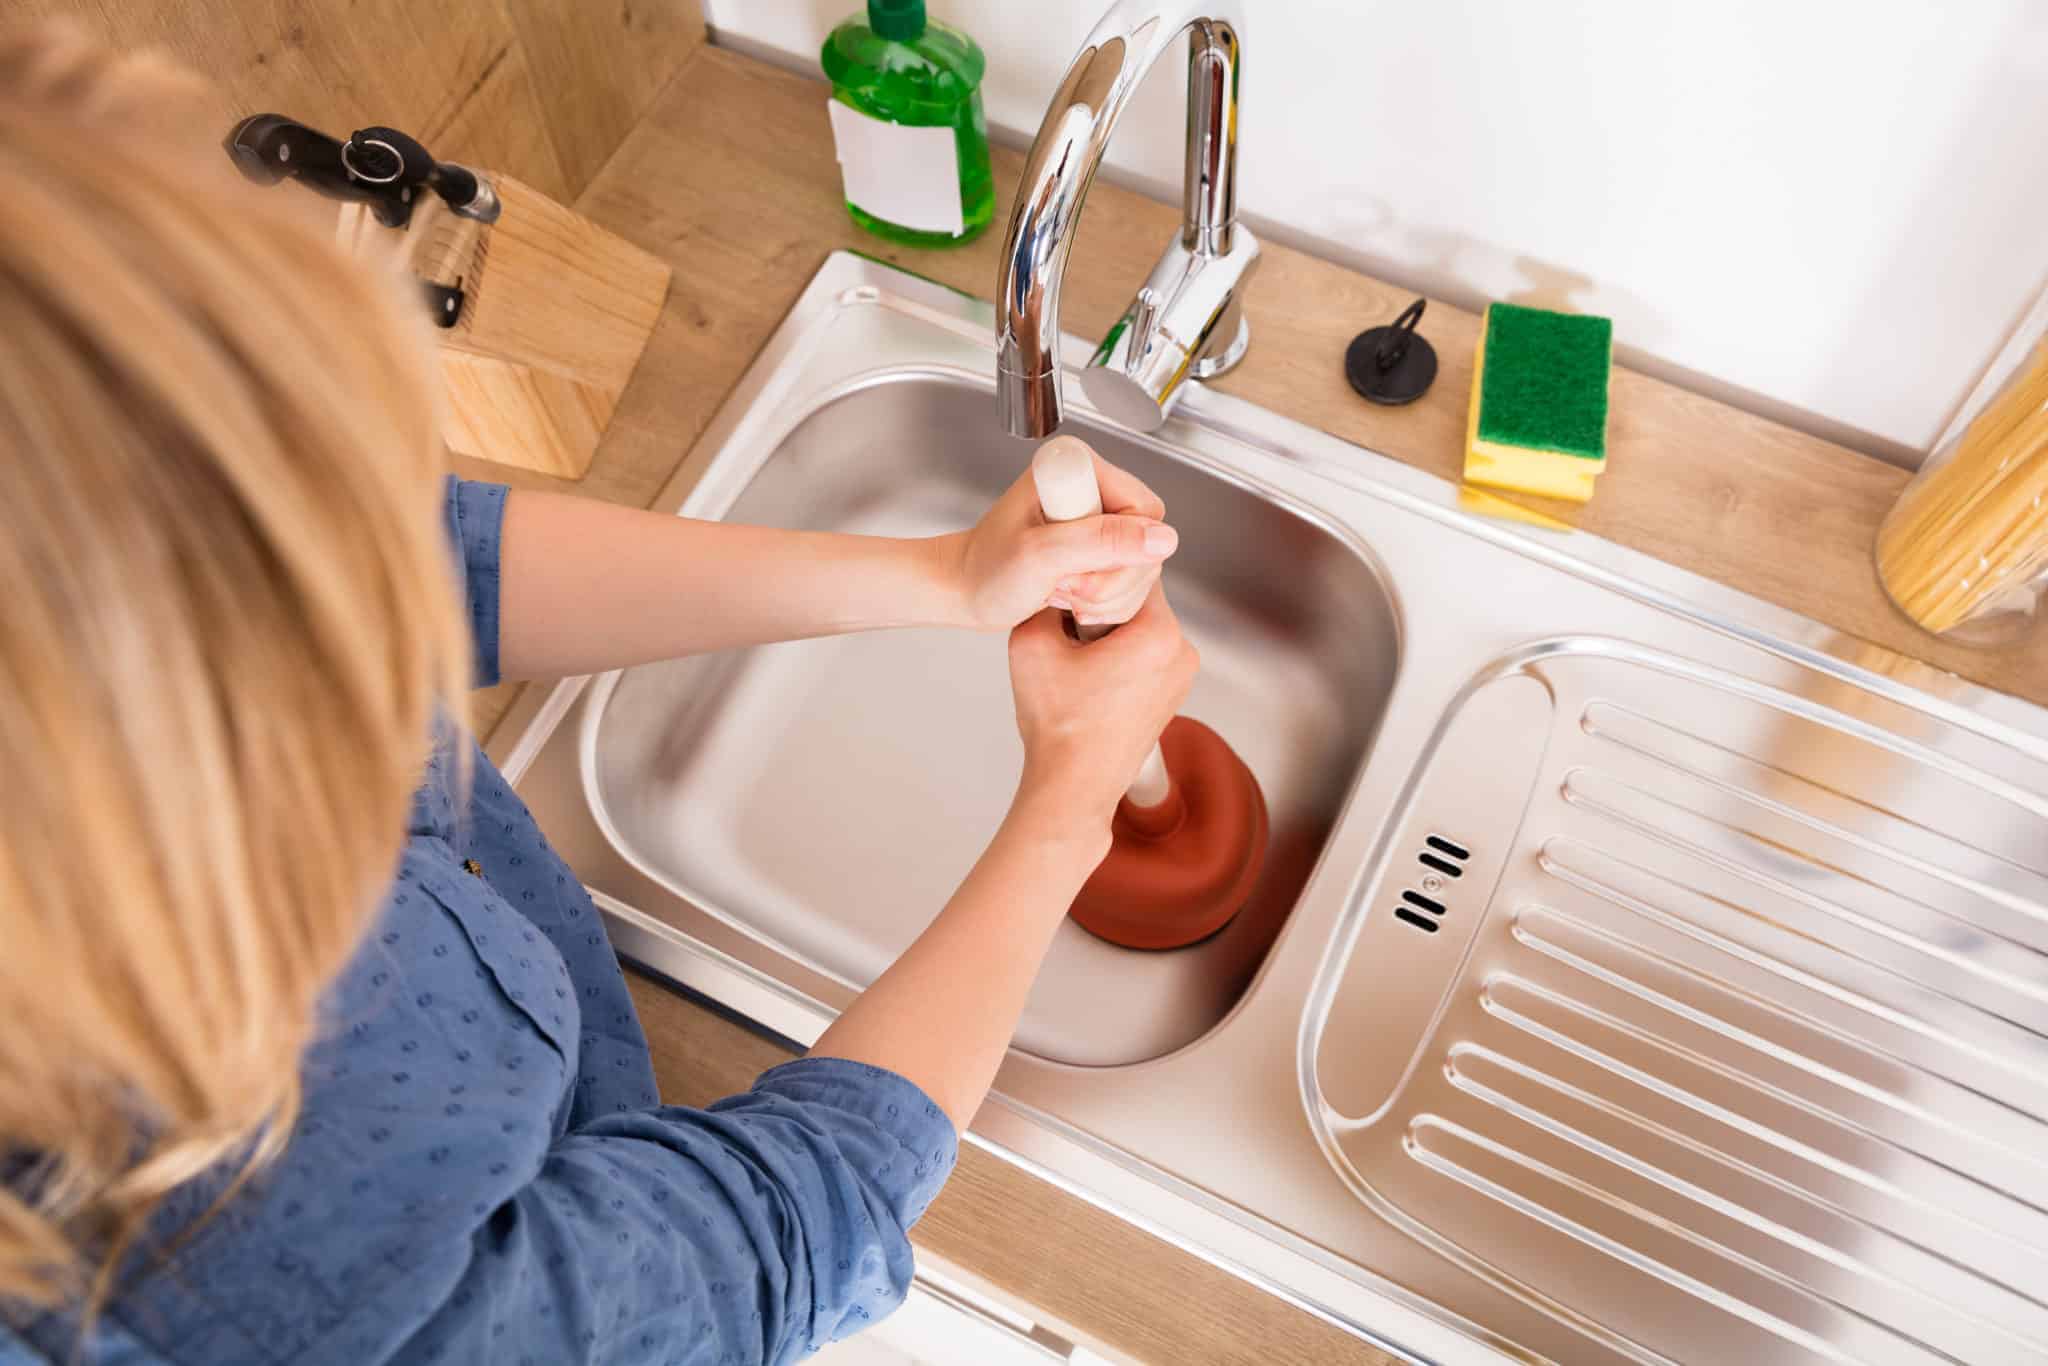 Simple Clogged Drain Home Remedy Ideas—and When You Should Call a Plumber